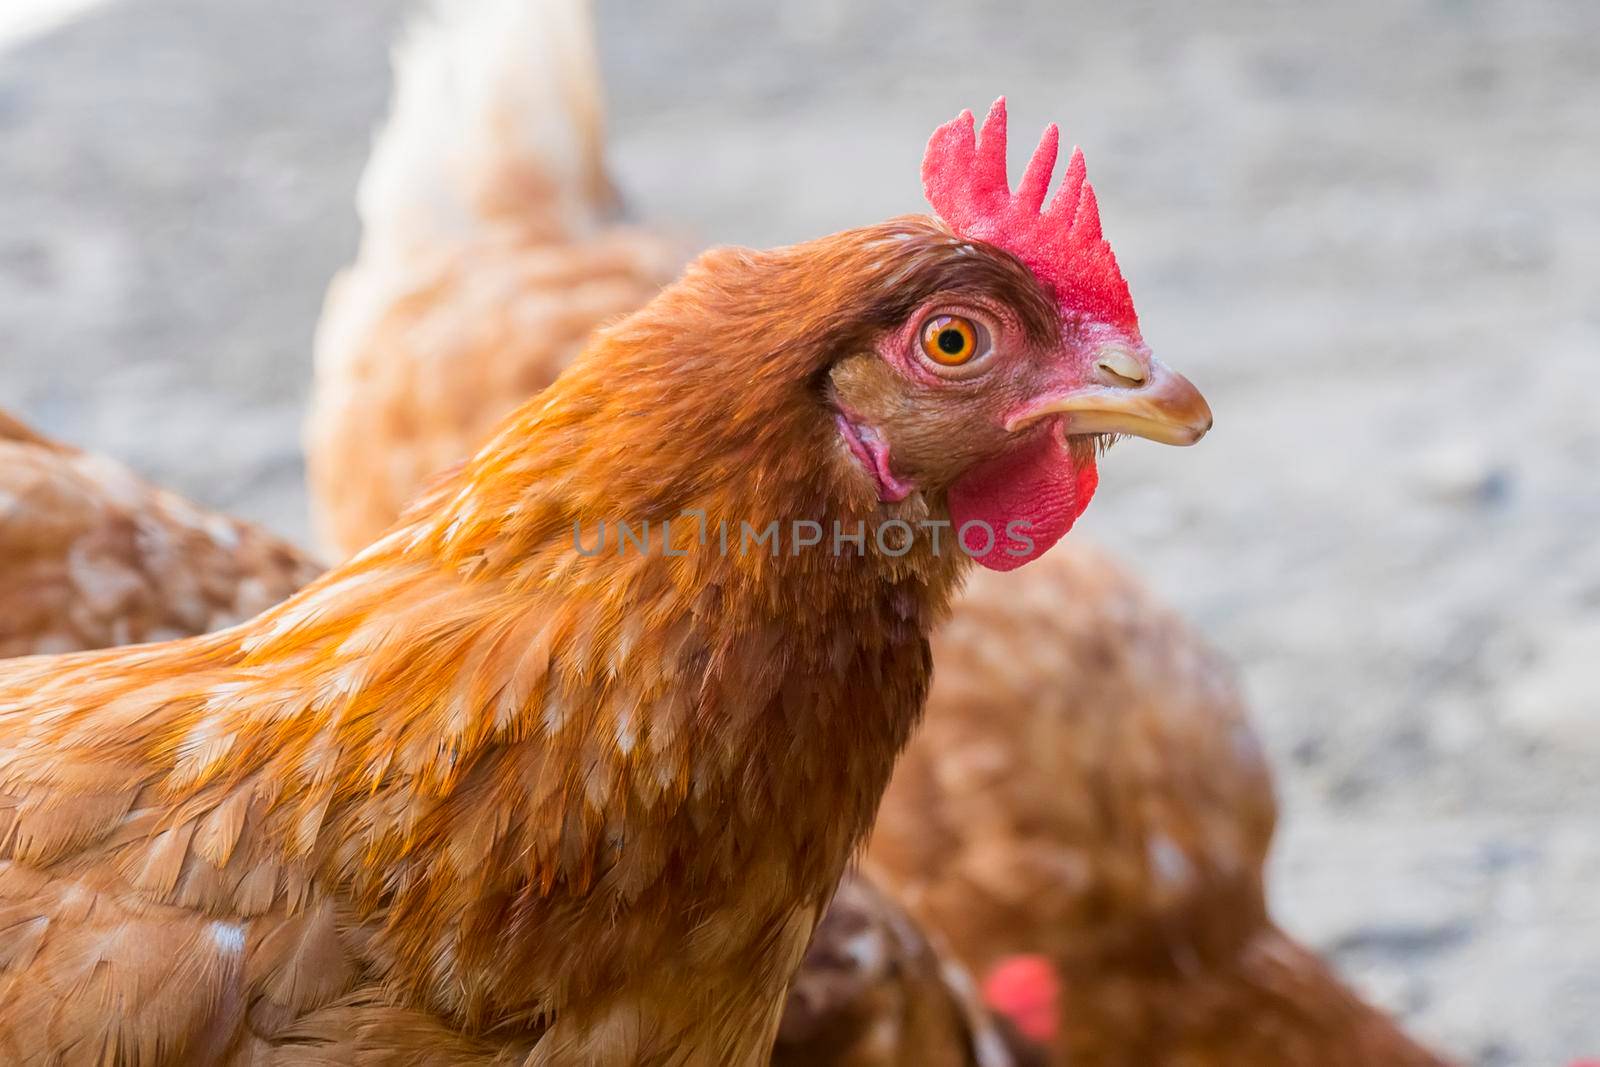 Hen staring because she is curious.